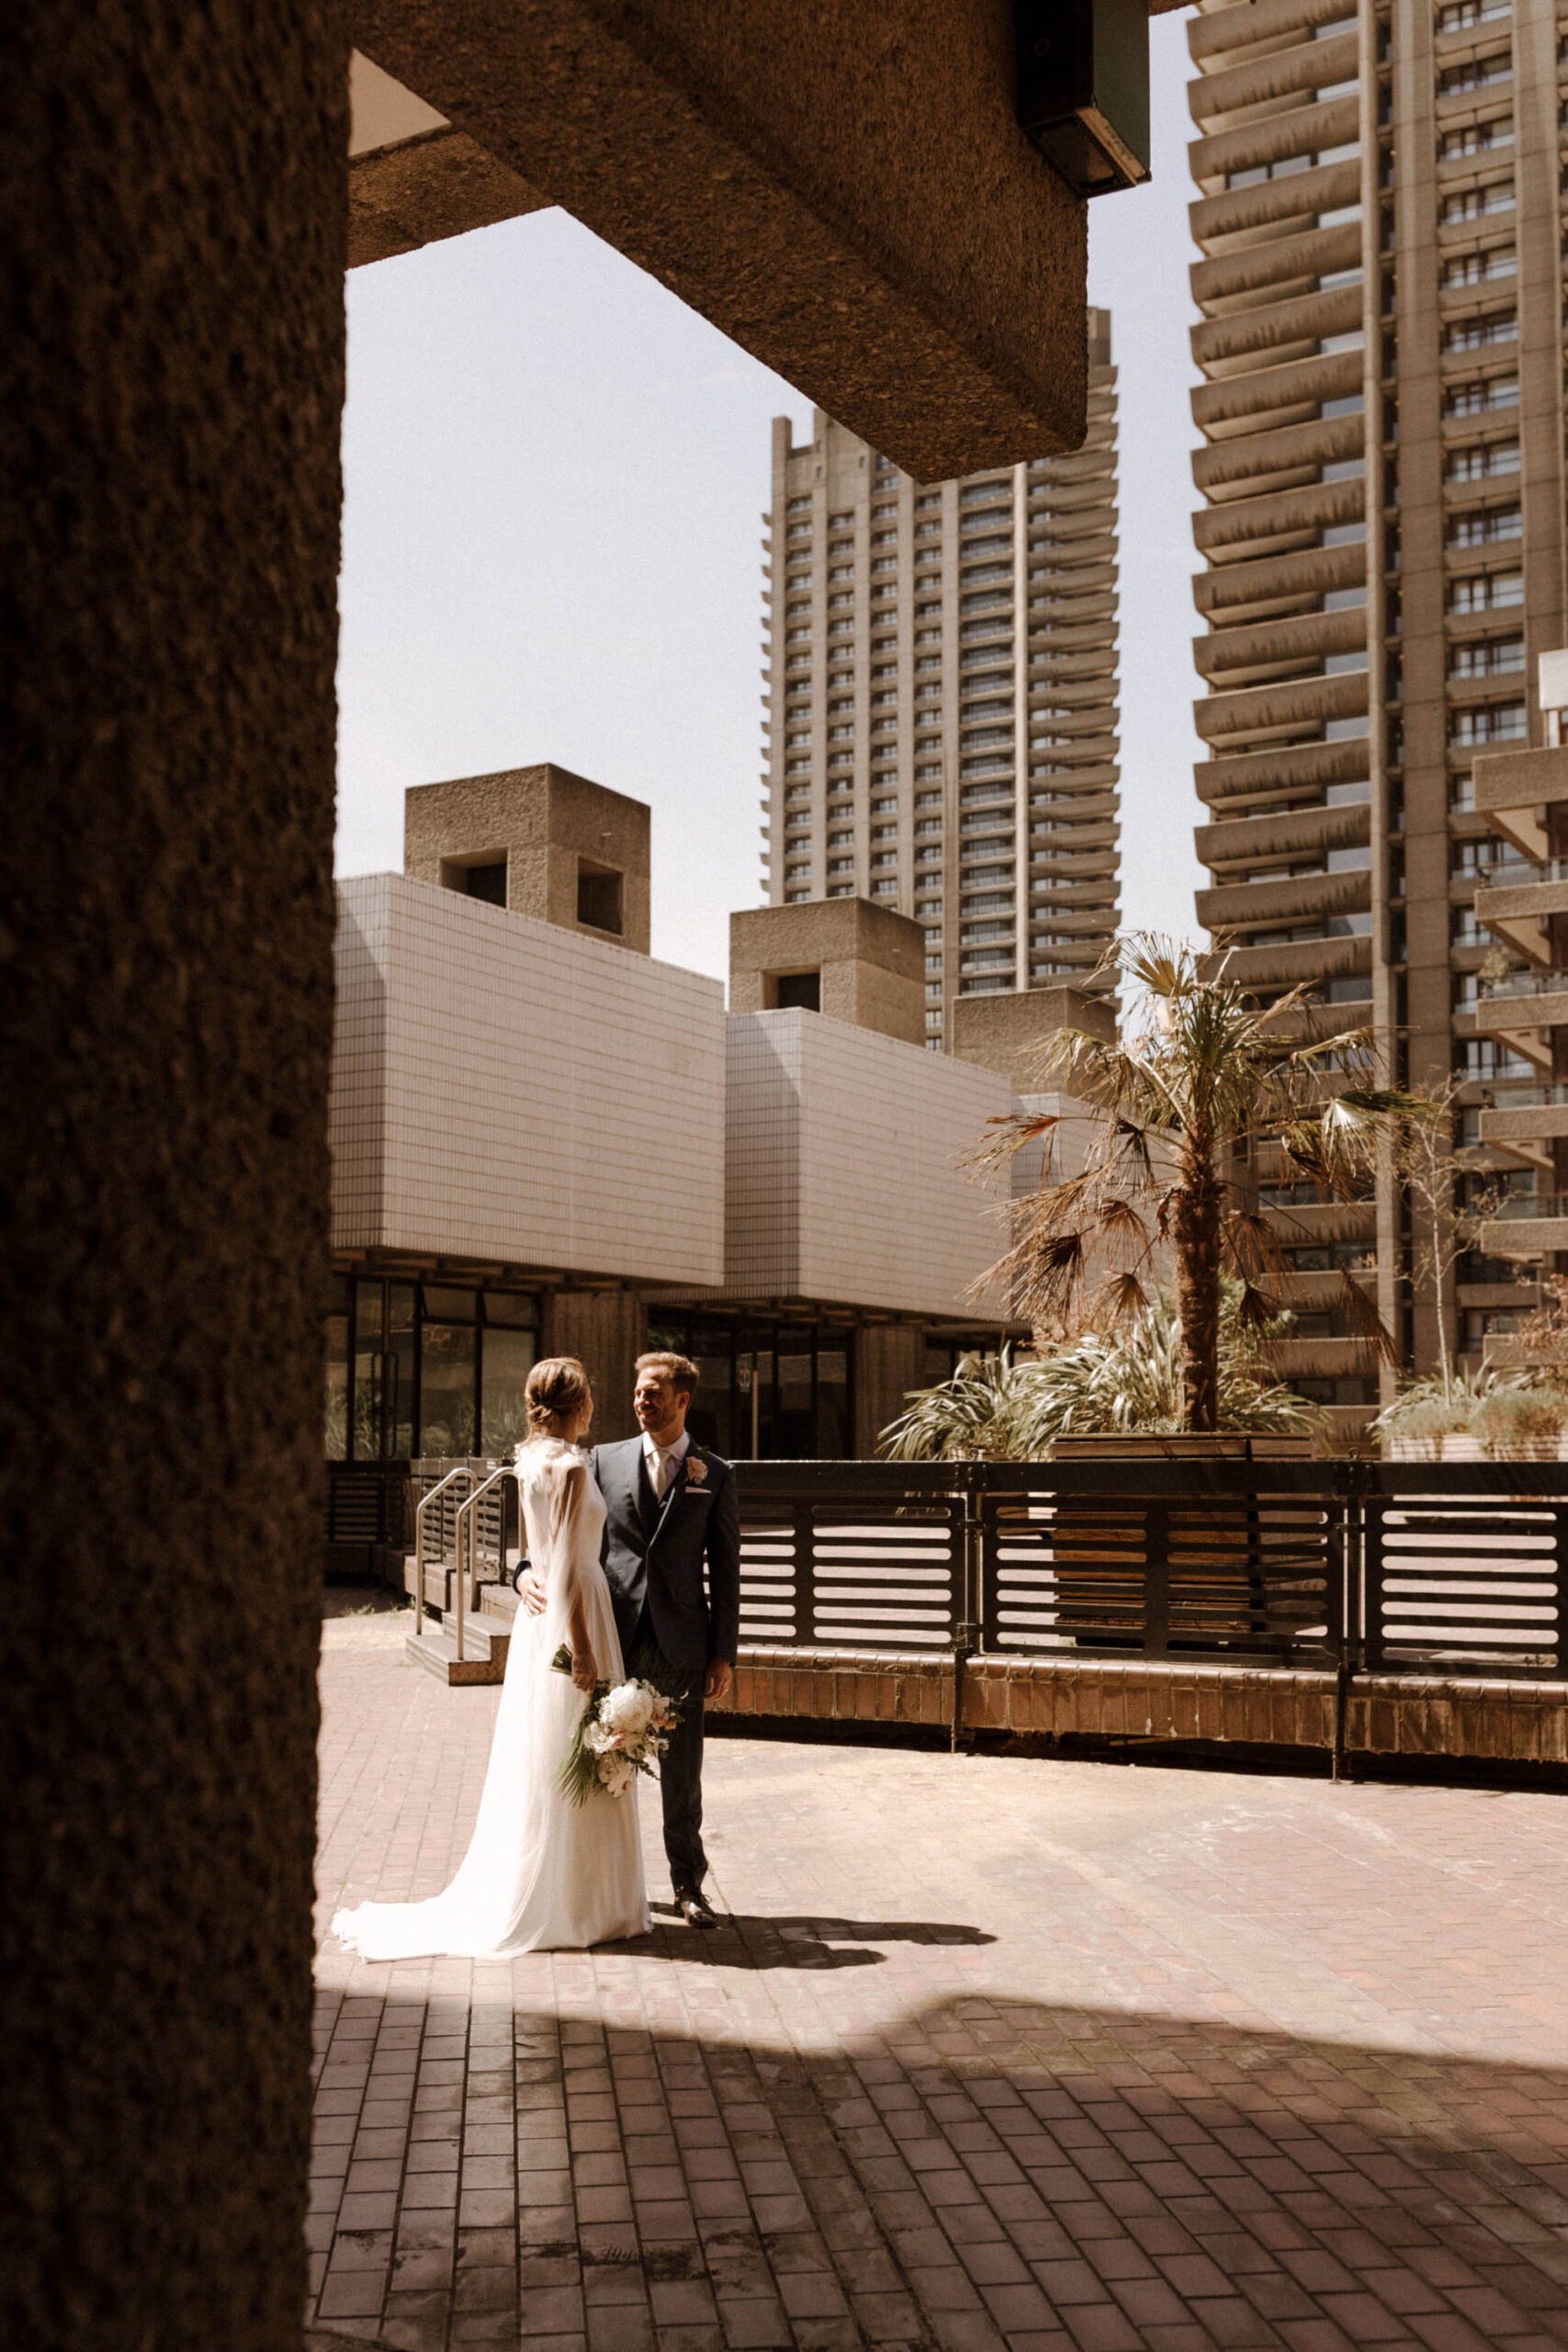 Wedding at The Barbican Centre. Photographer credit Joe from the Curries